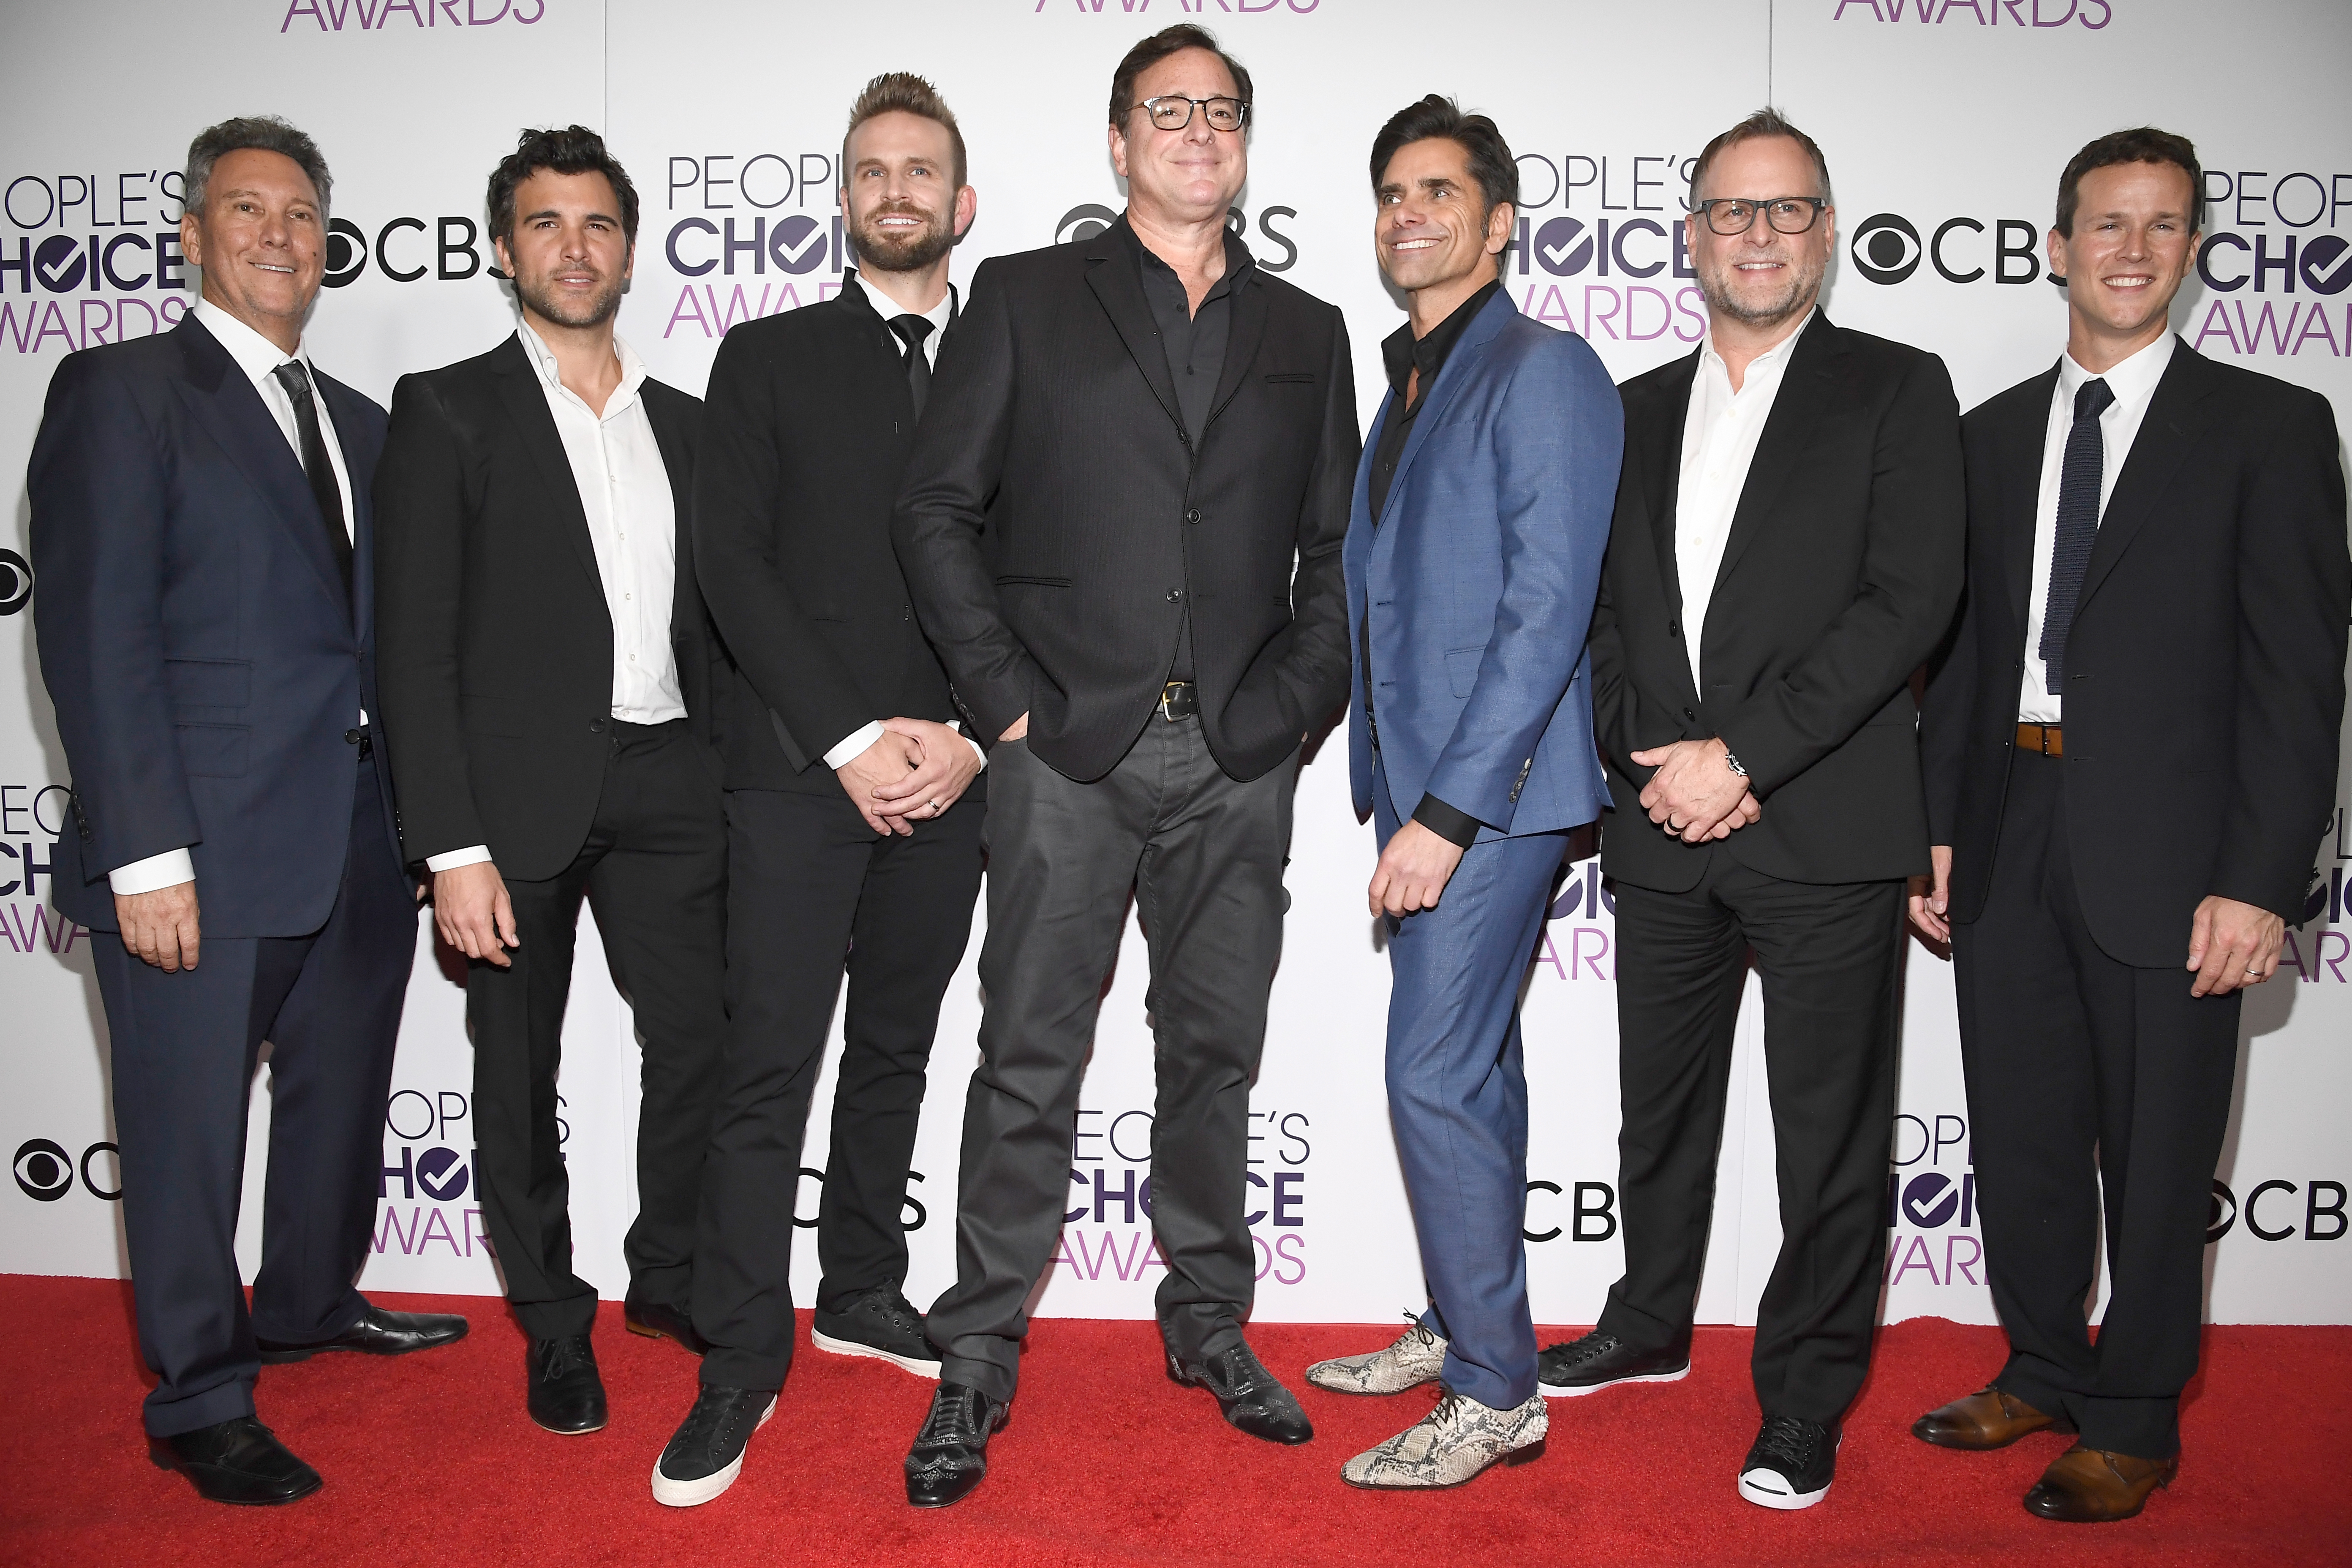 (L-R) Producer Jeff Franklin, actors Juan Pablo Di Pace, John Brotherton, Bob Saget, John Stamos, Dave Coulier and Scott Weinger, winners of the Favorite Premium Comedy Series Award, 'Fuller House' pose in the press room during the People's Choice Awards 2017 at Microsoft Theater on January 18, 2017 in Los Angeles, California. (Photo by Kevork Djansezian/Getty Images)